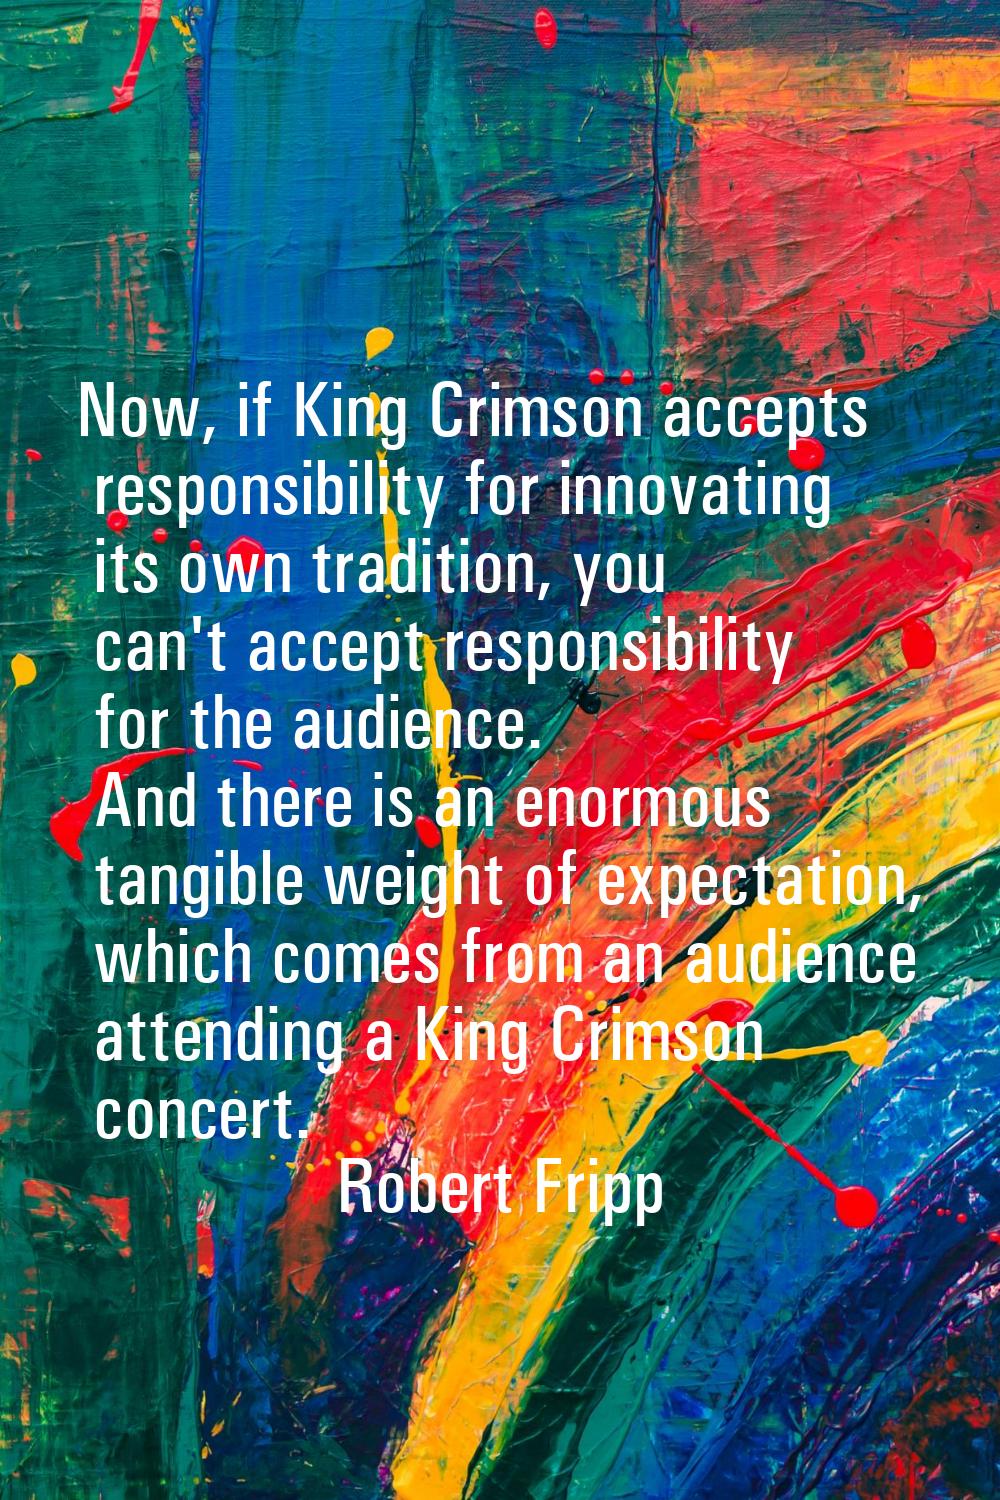 Now, if King Crimson accepts responsibility for innovating its own tradition, you can't accept resp